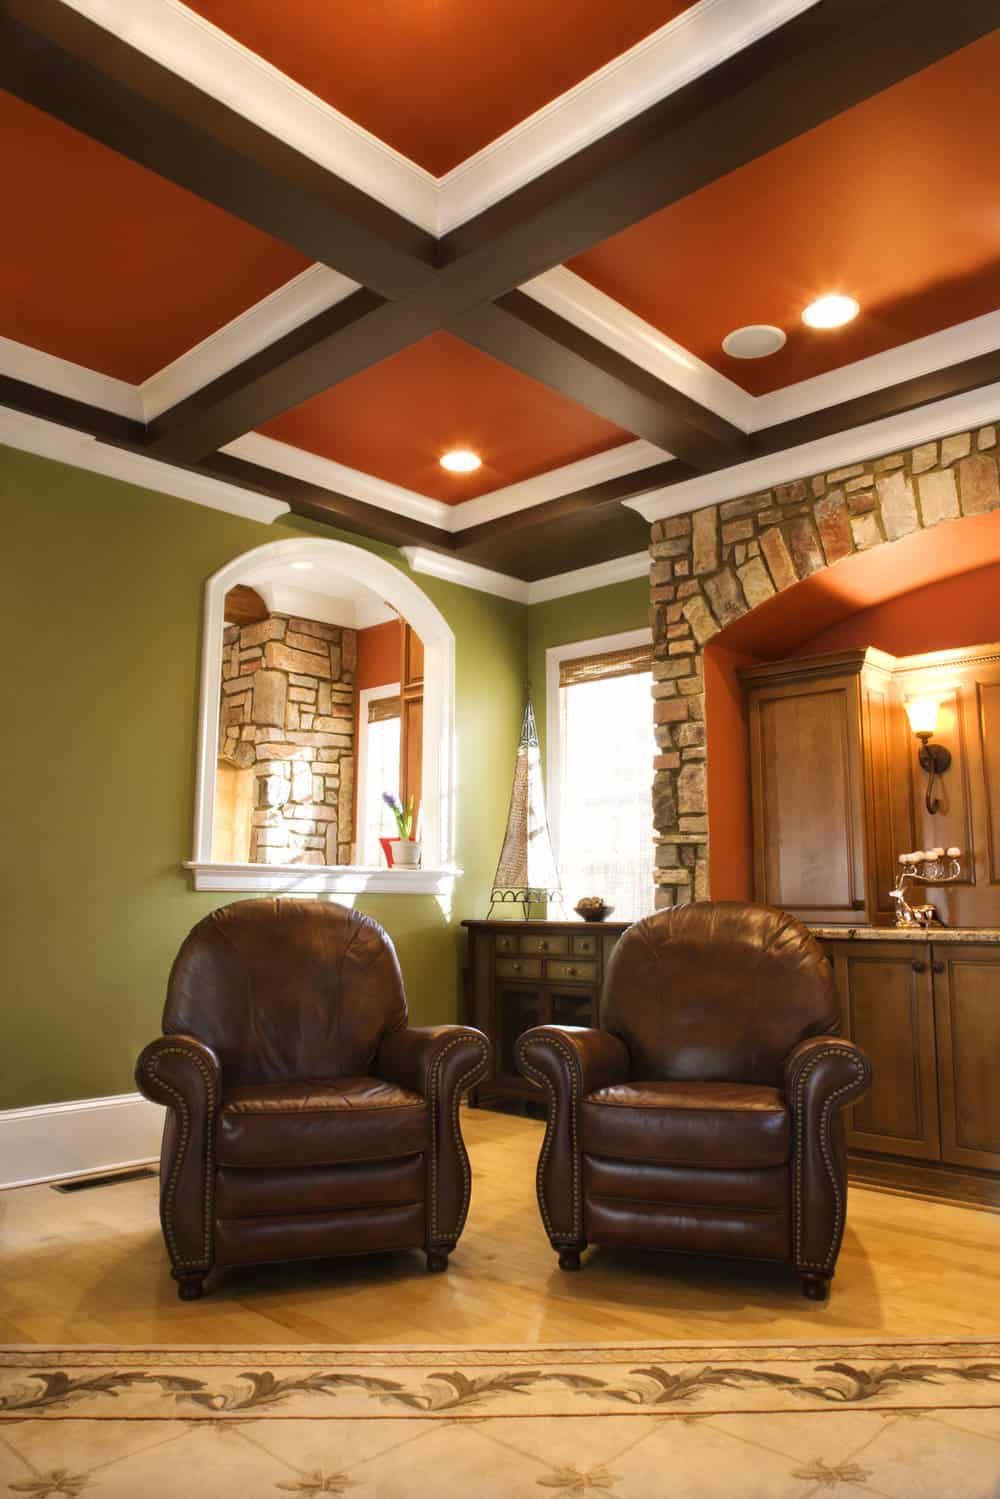 Two brown leather chairs in an upscale living room with wooden box beam ceiling and stone arch accents. Vertical shot.